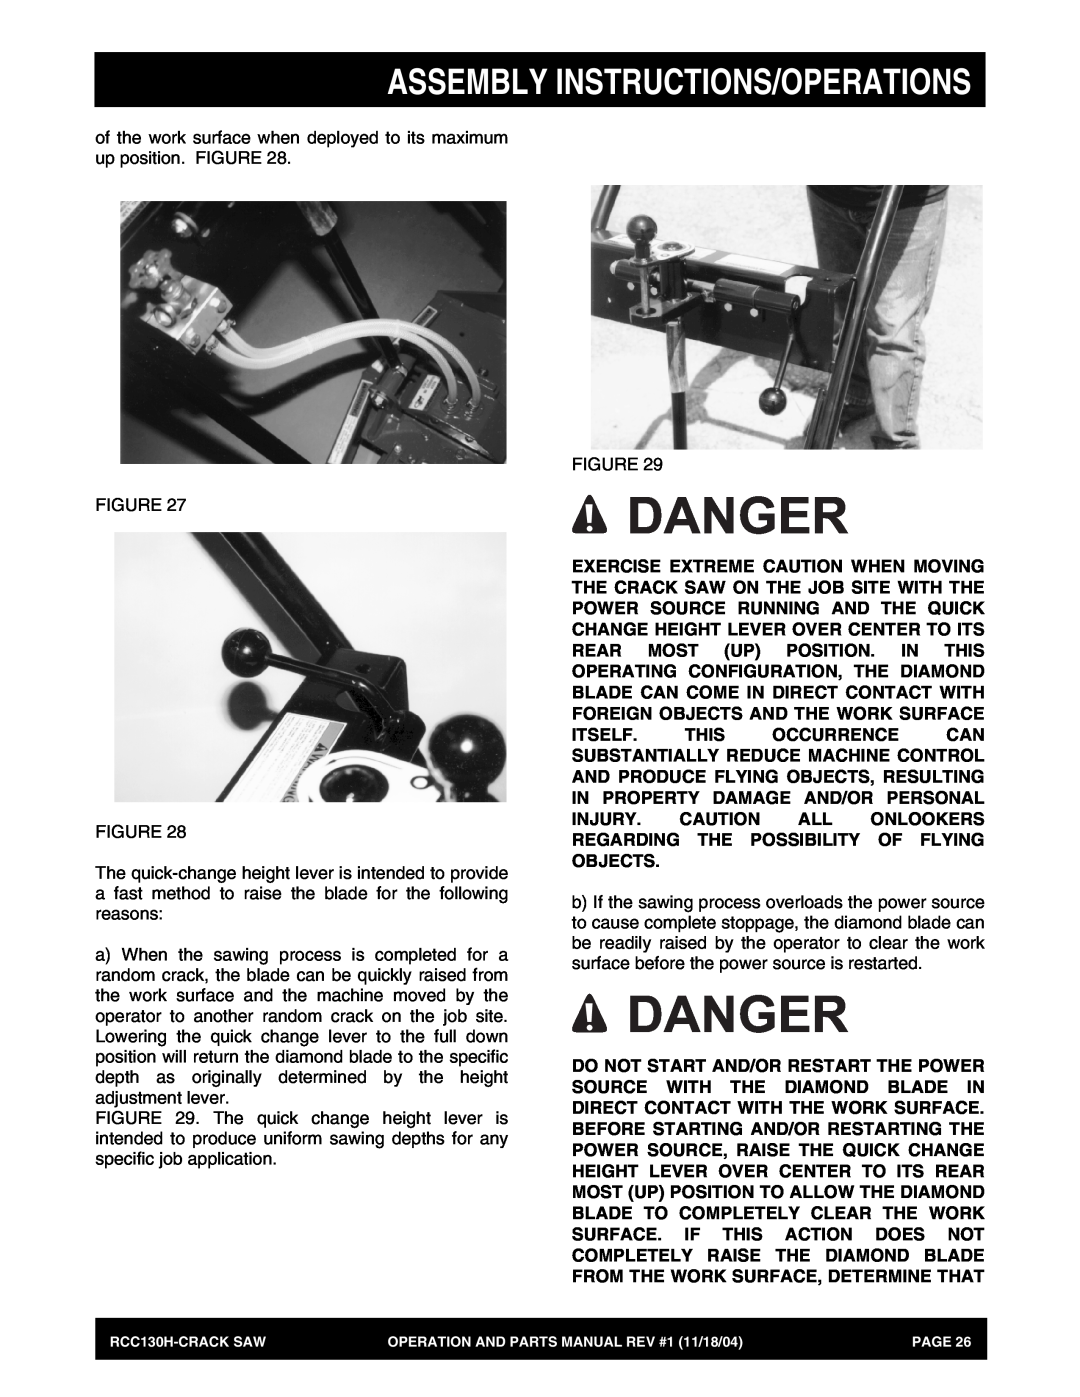 Stow RCC130H manual Danger, Assembly Instructions/Operations 